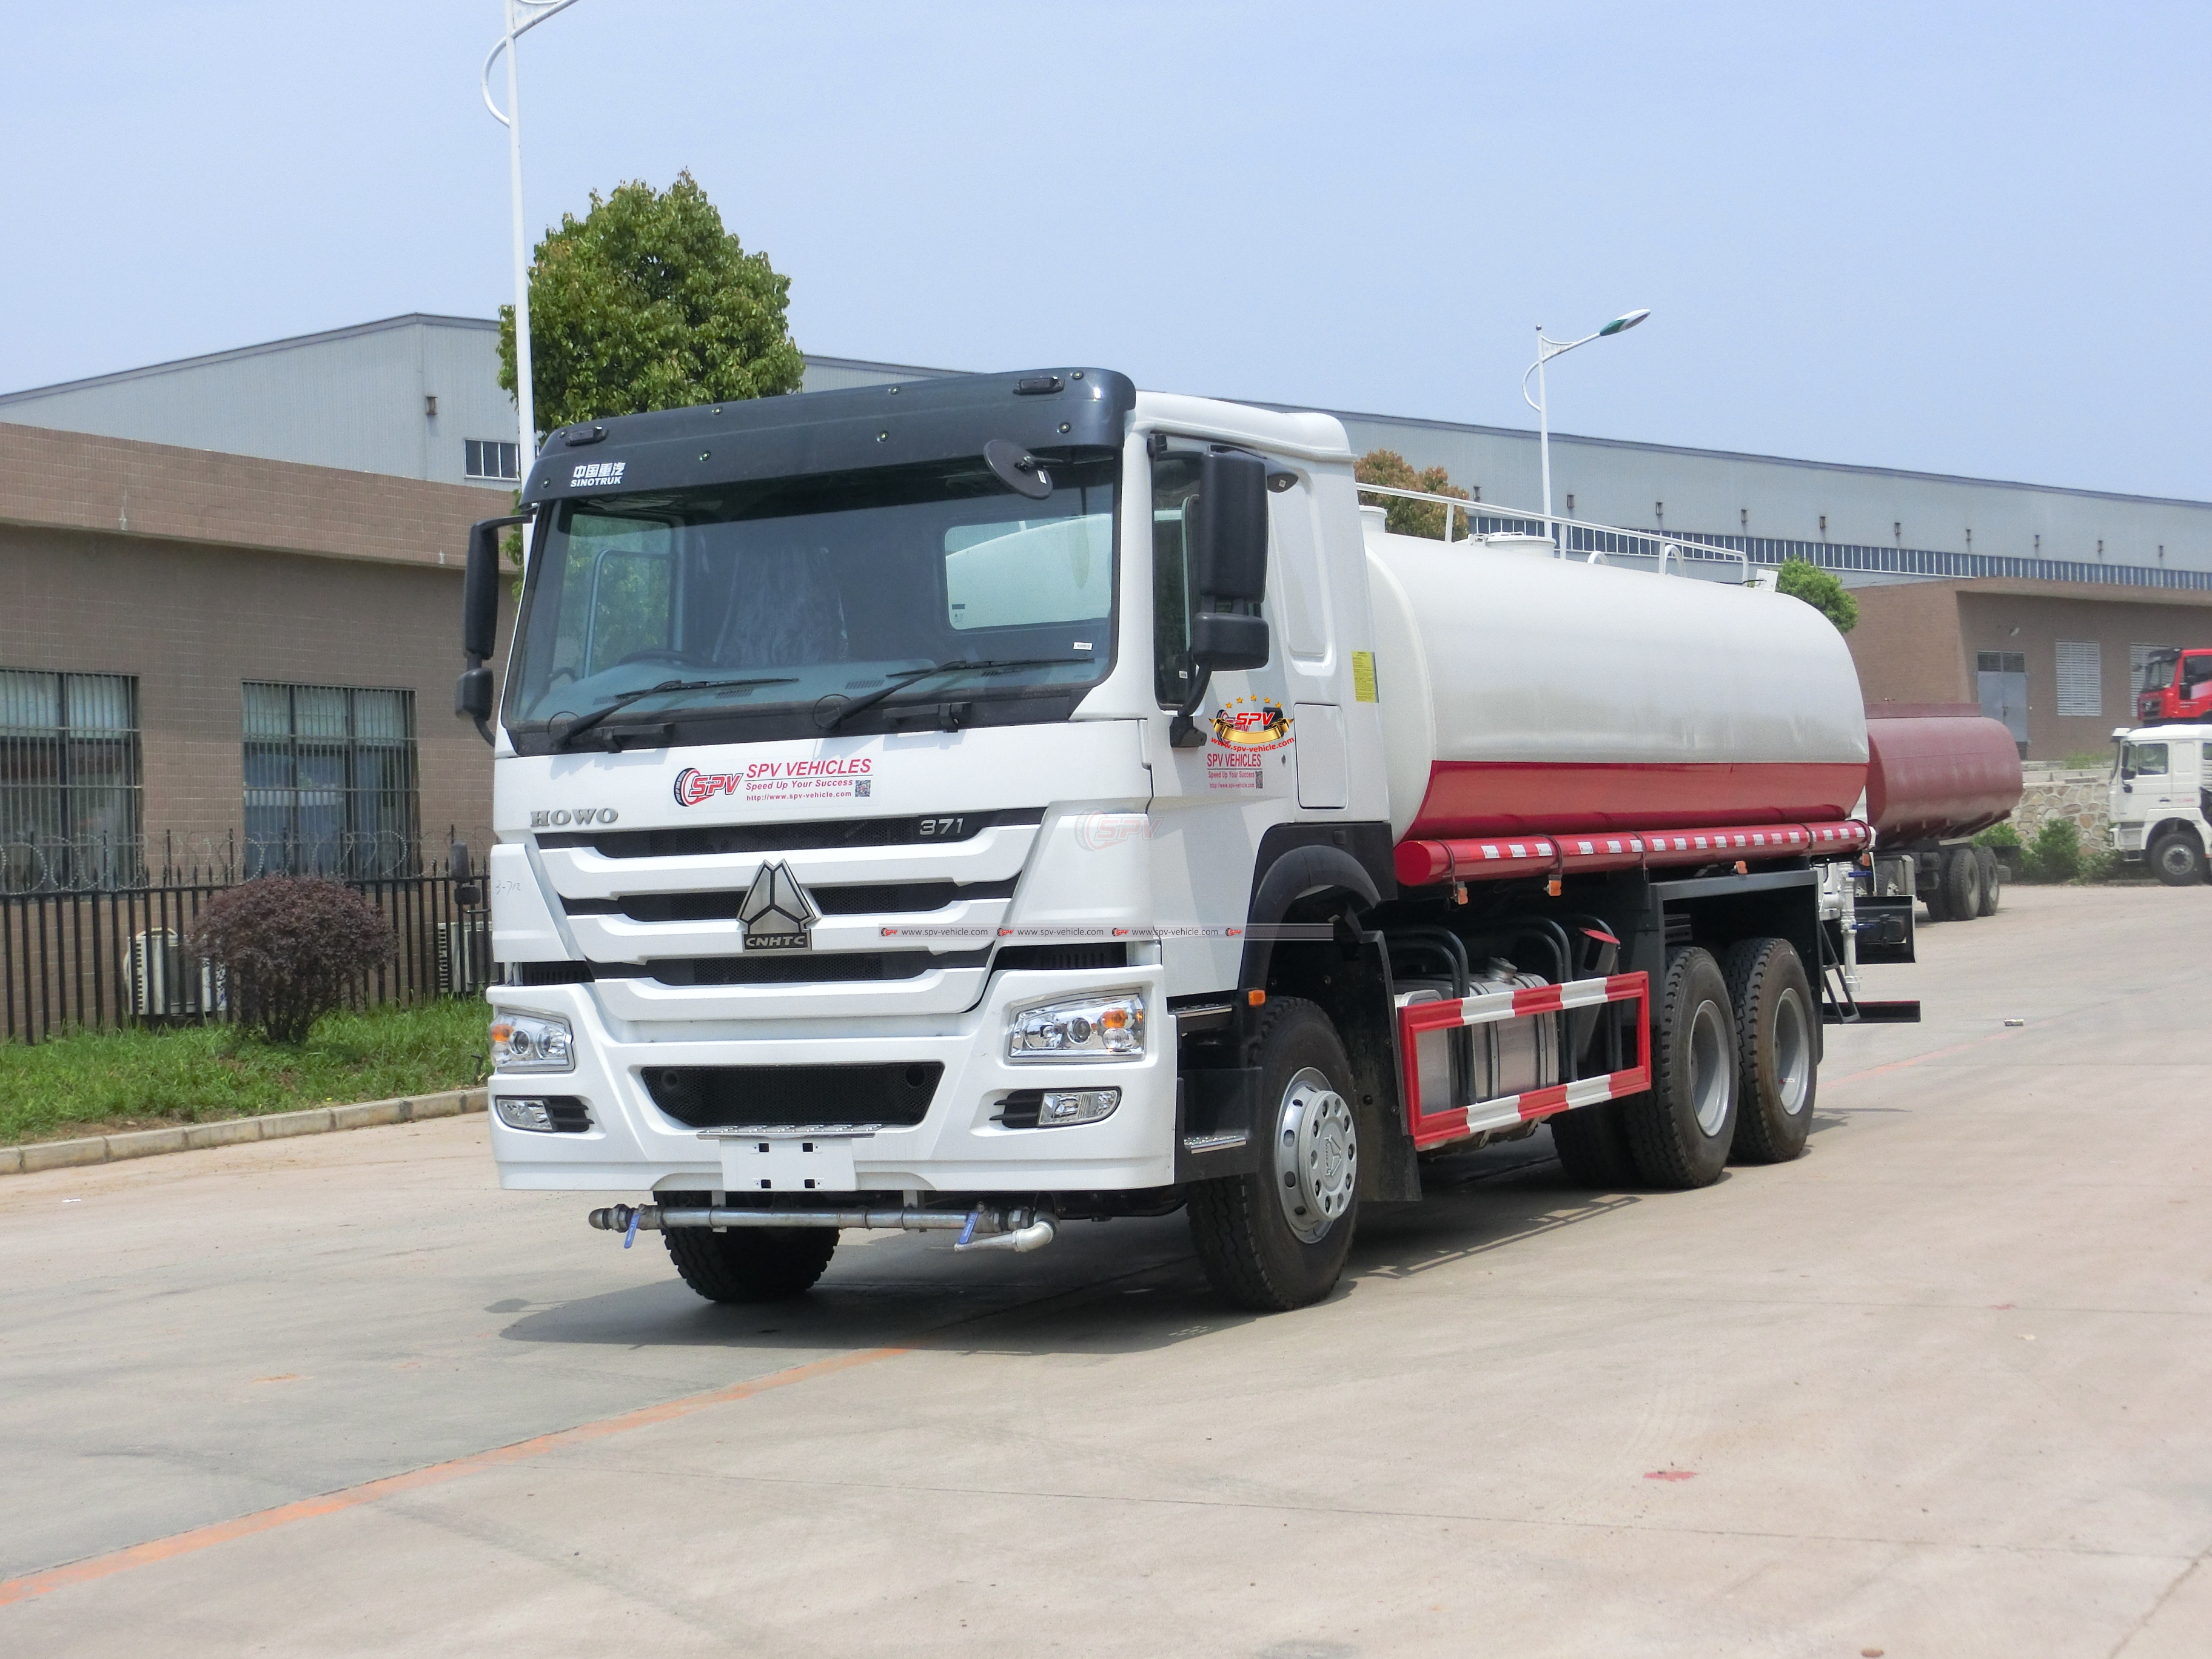 SPV shipped water spraying truck Sinotruk(20,000 litres) to Papua New Guinea in April, 2018.